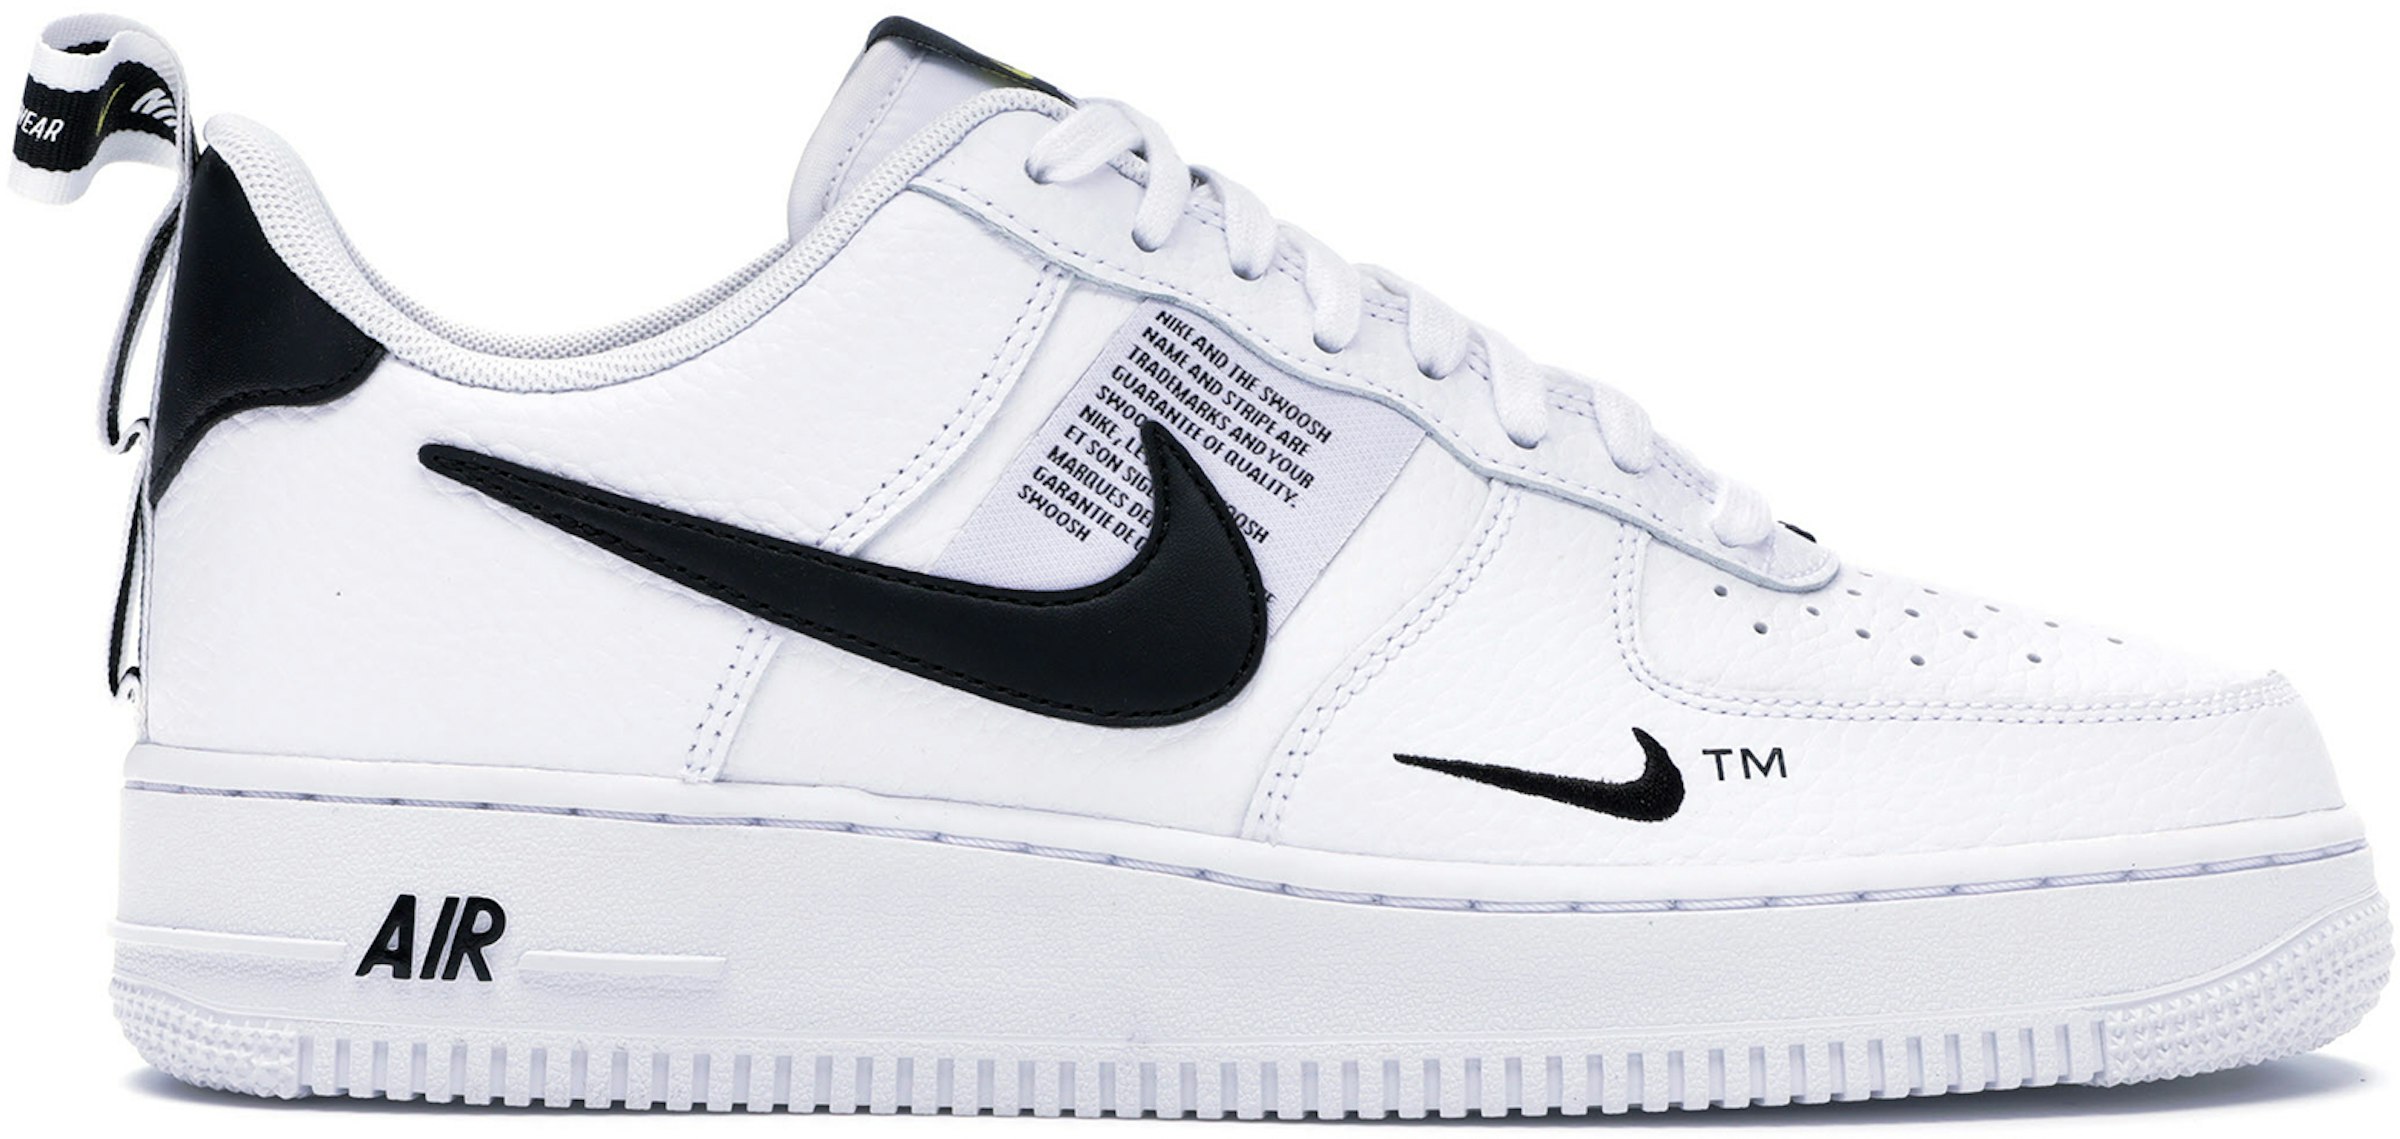 Air Force 1 Low Utility White Black Hombre - -